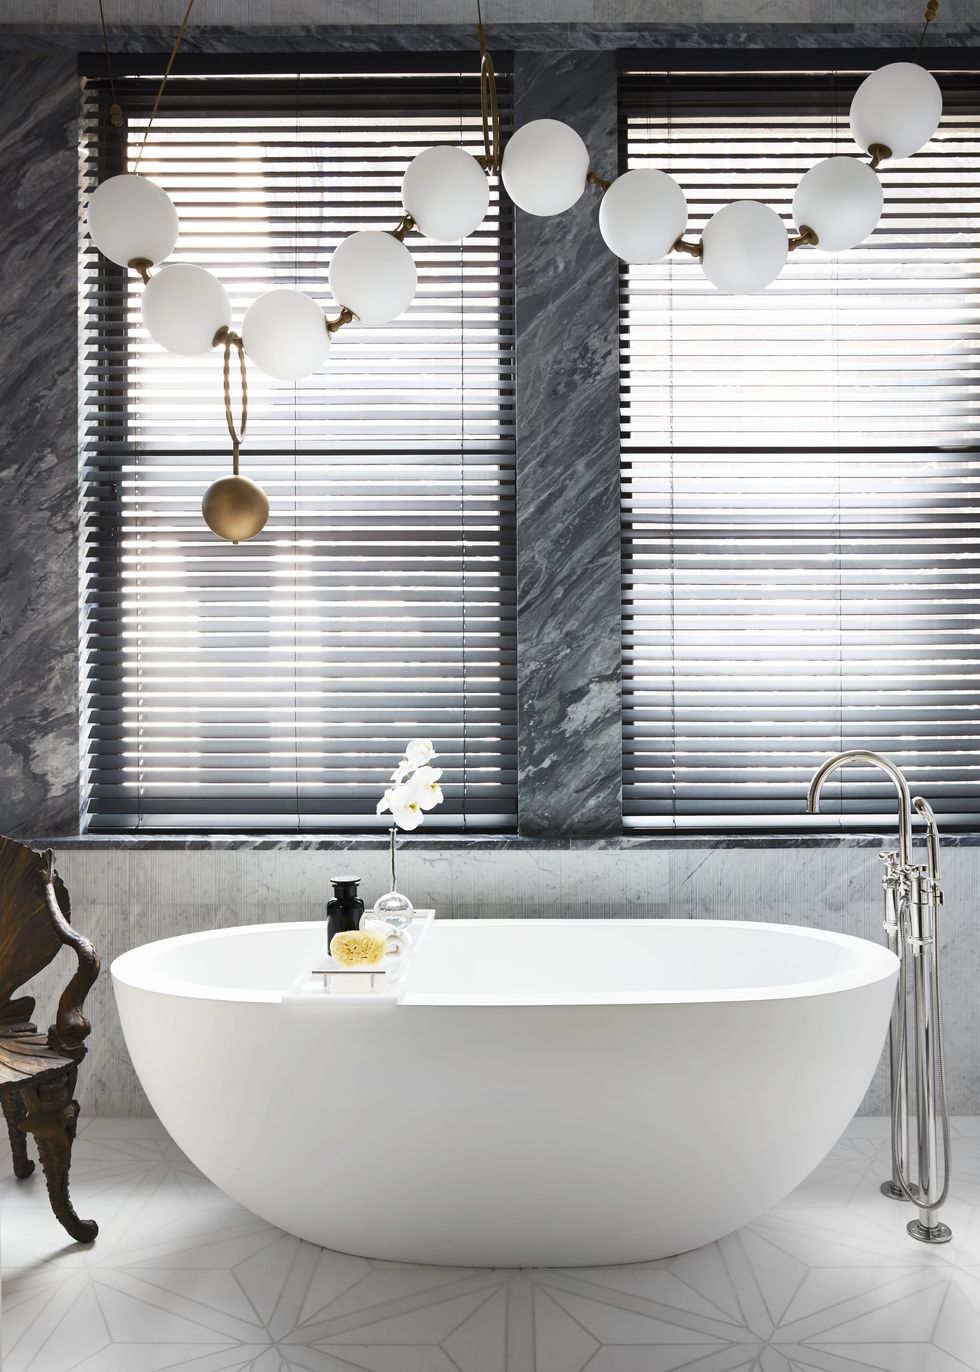 a handcrafted pearl like lighting fixture by canadian designer larose guyon dangles over a deep soaking tub